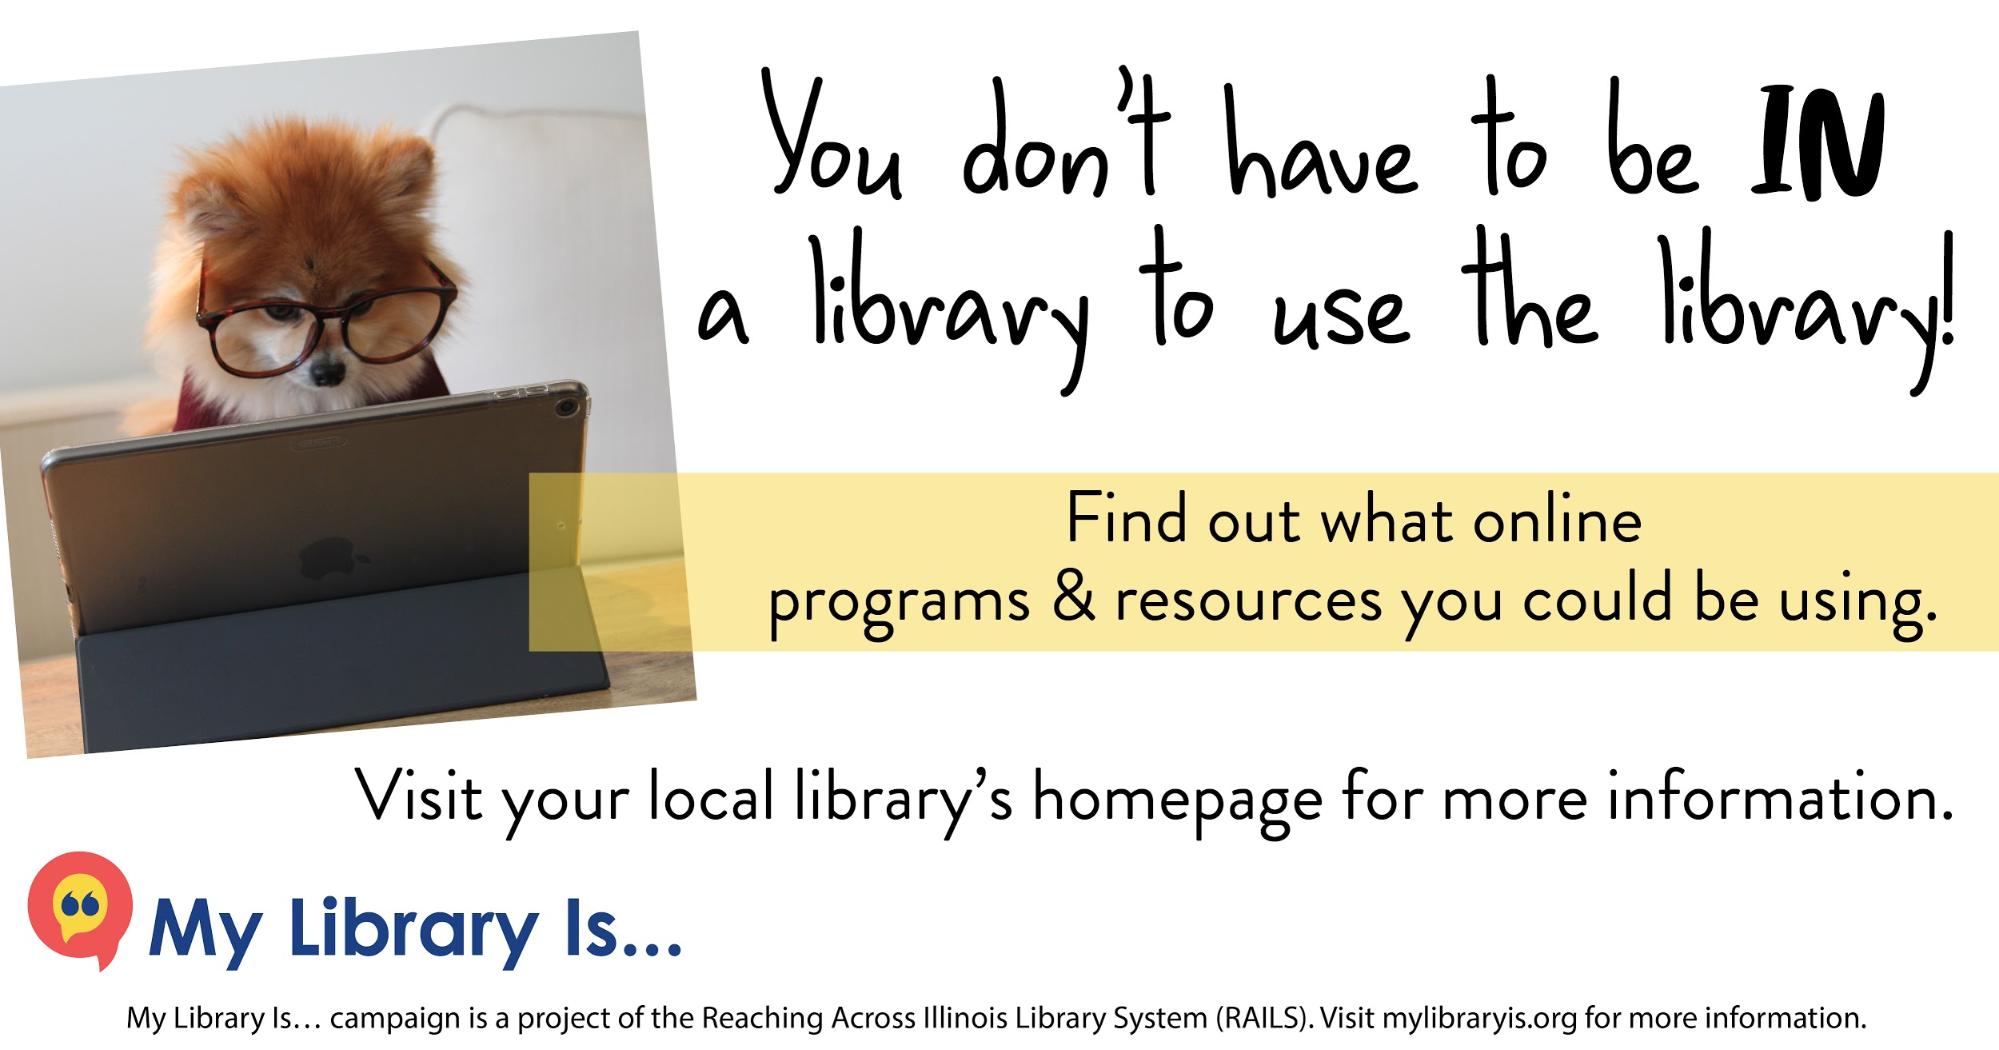 Image for Facebook. "You don't have to be IN a library to use the library! Find out what online programs & resources you could be using. Visit your local library's homepage for more information." Footer provides mylibraryis.org URL.